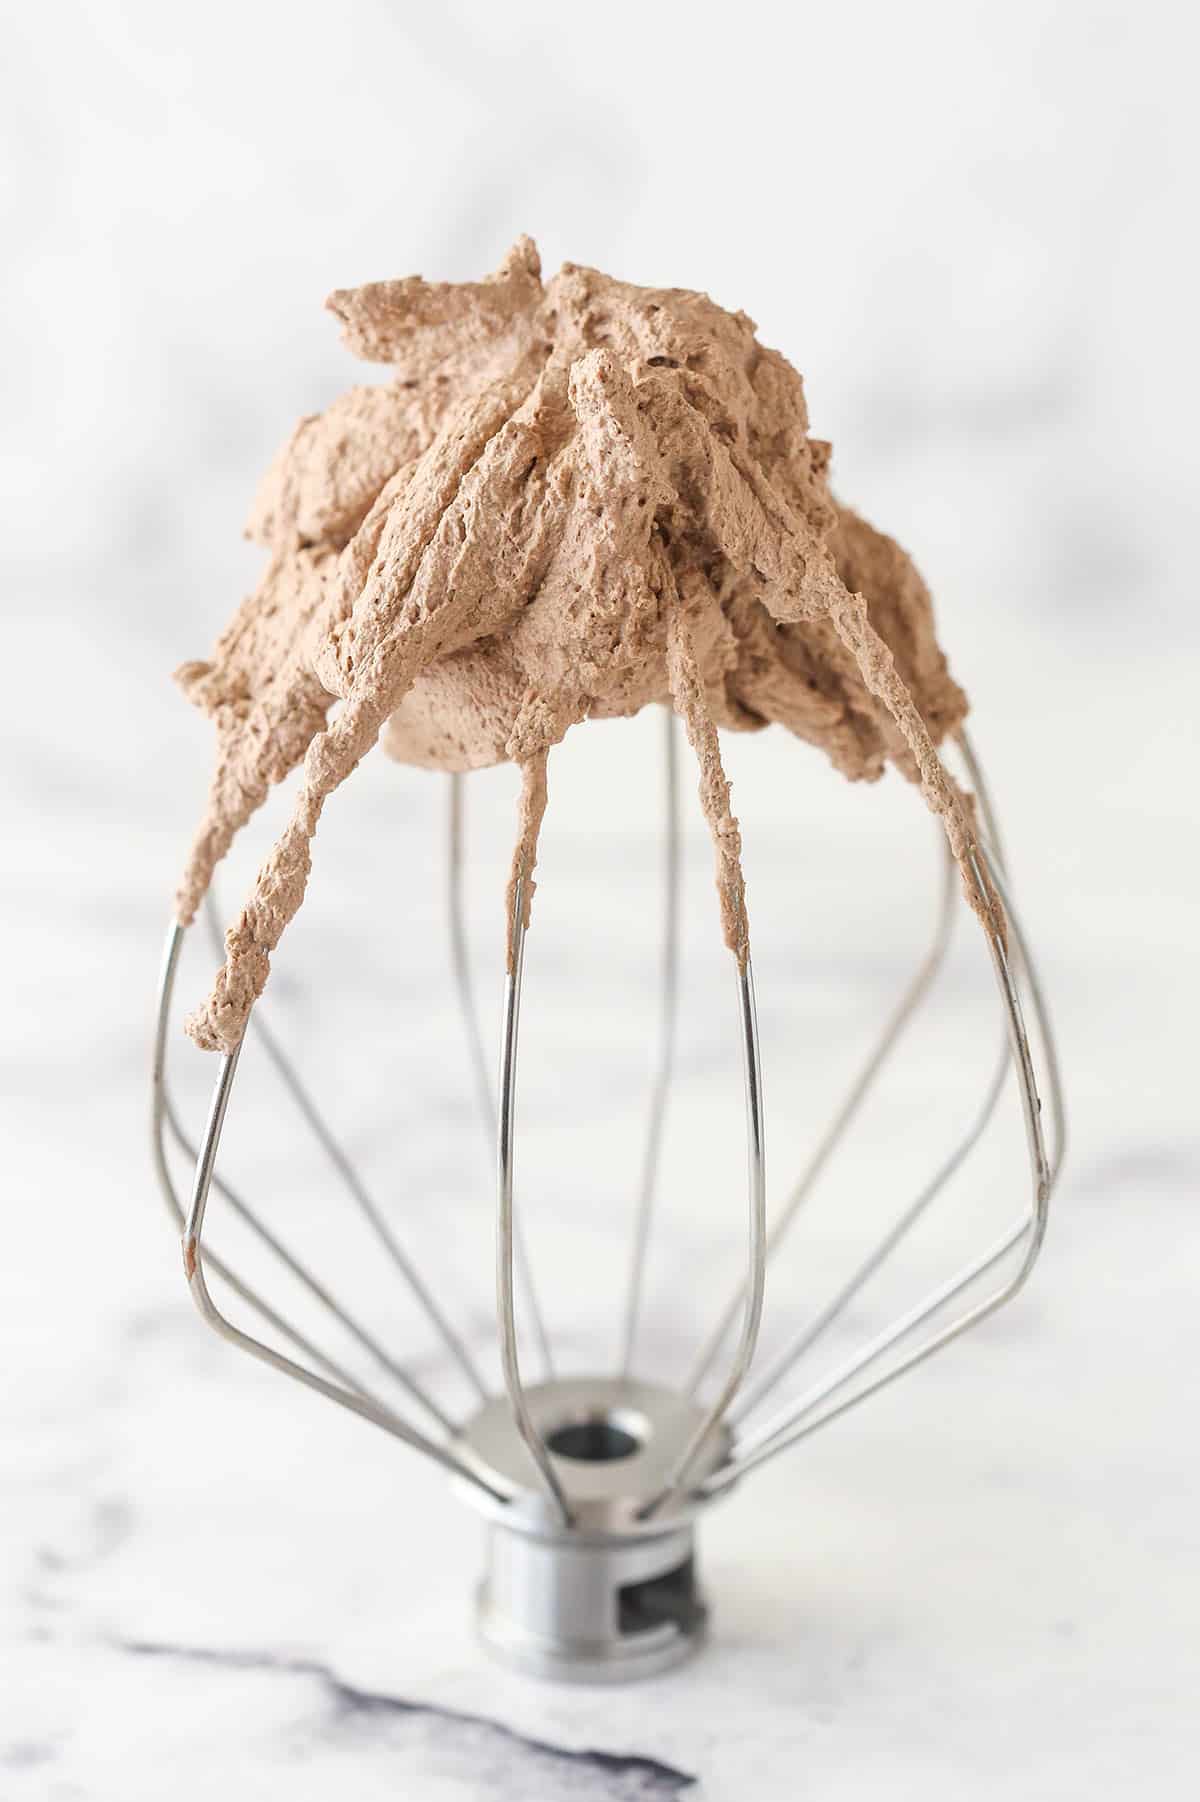 Chocolate whipped cream on a whisk.